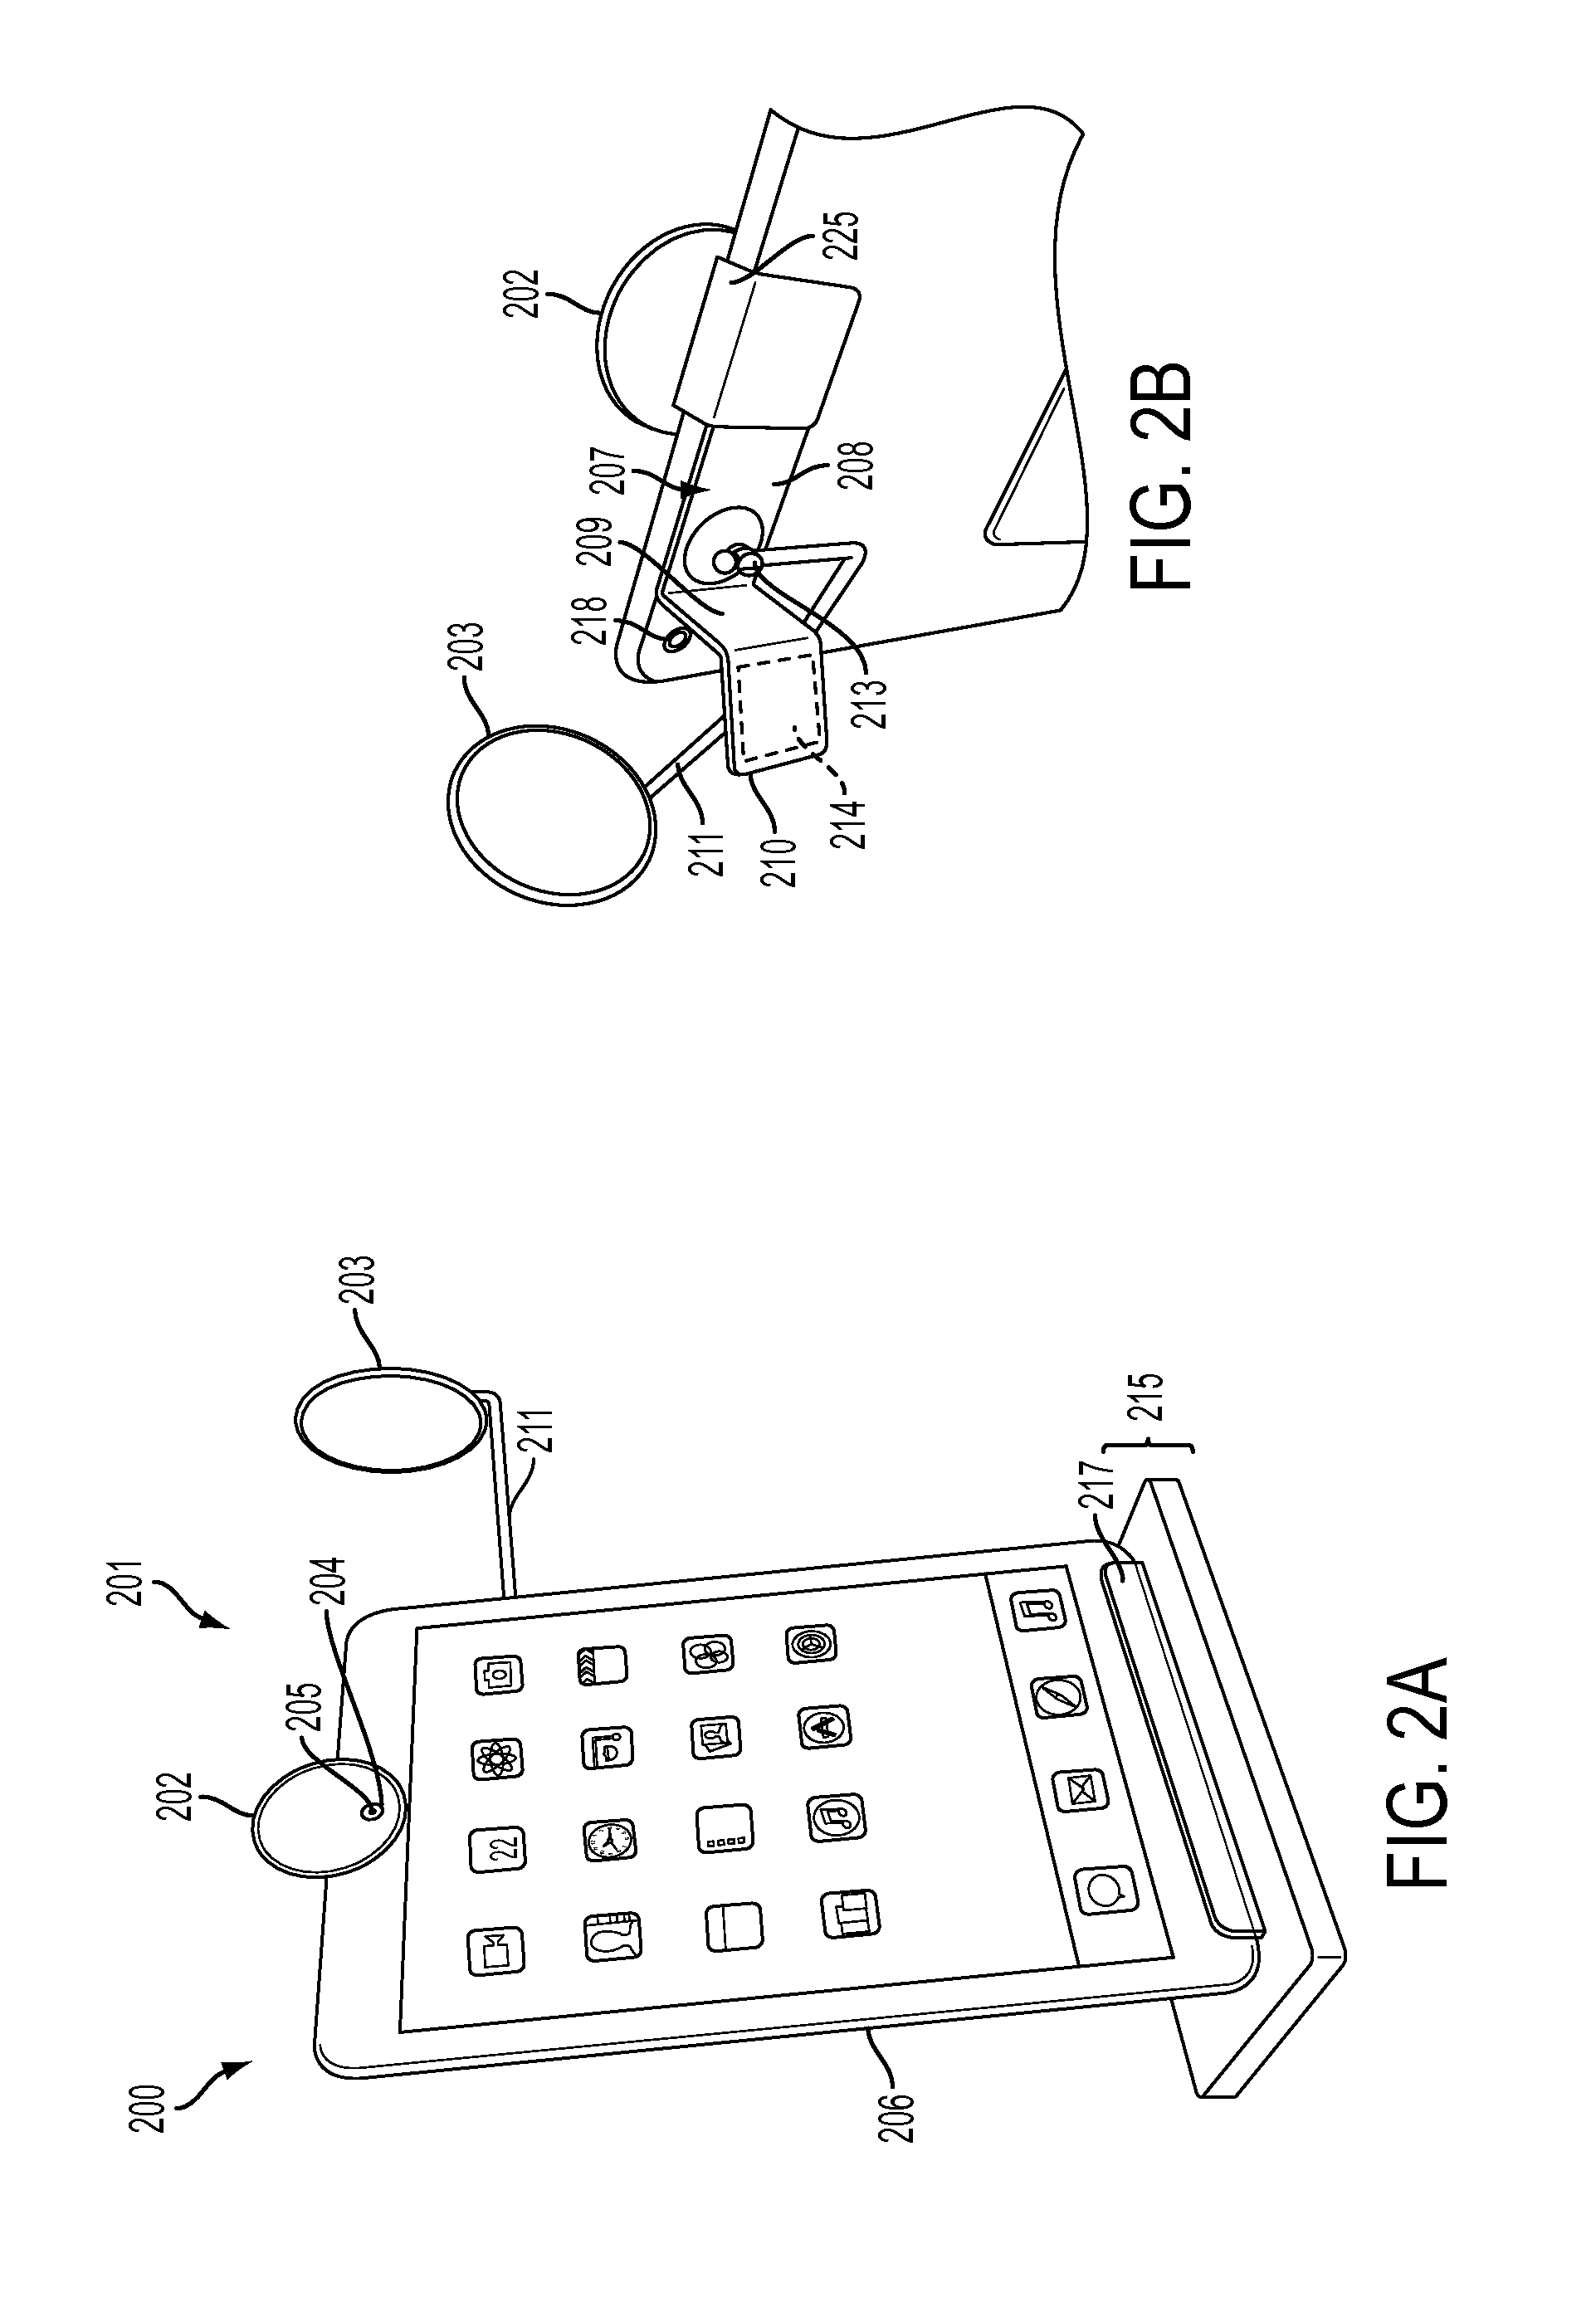 Virtual mirror systems and methods for remotely training and/or supporting contact lens users